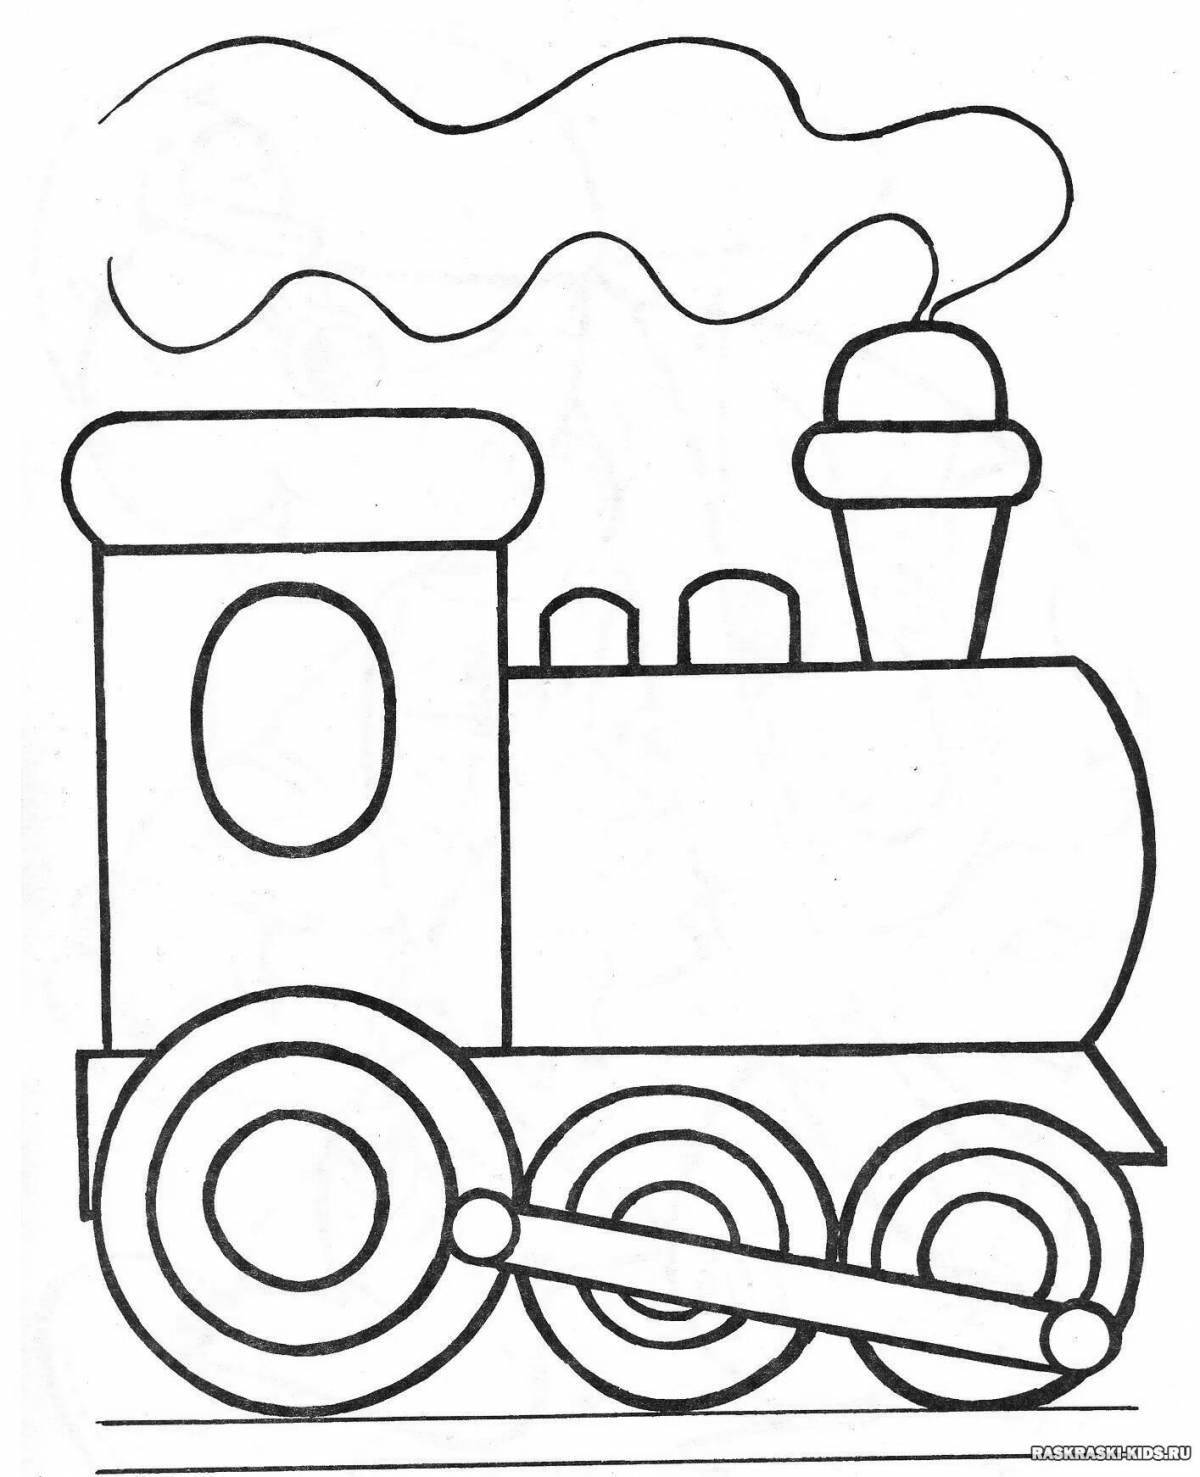 Nice transport coloring book for kids 3-4 years old